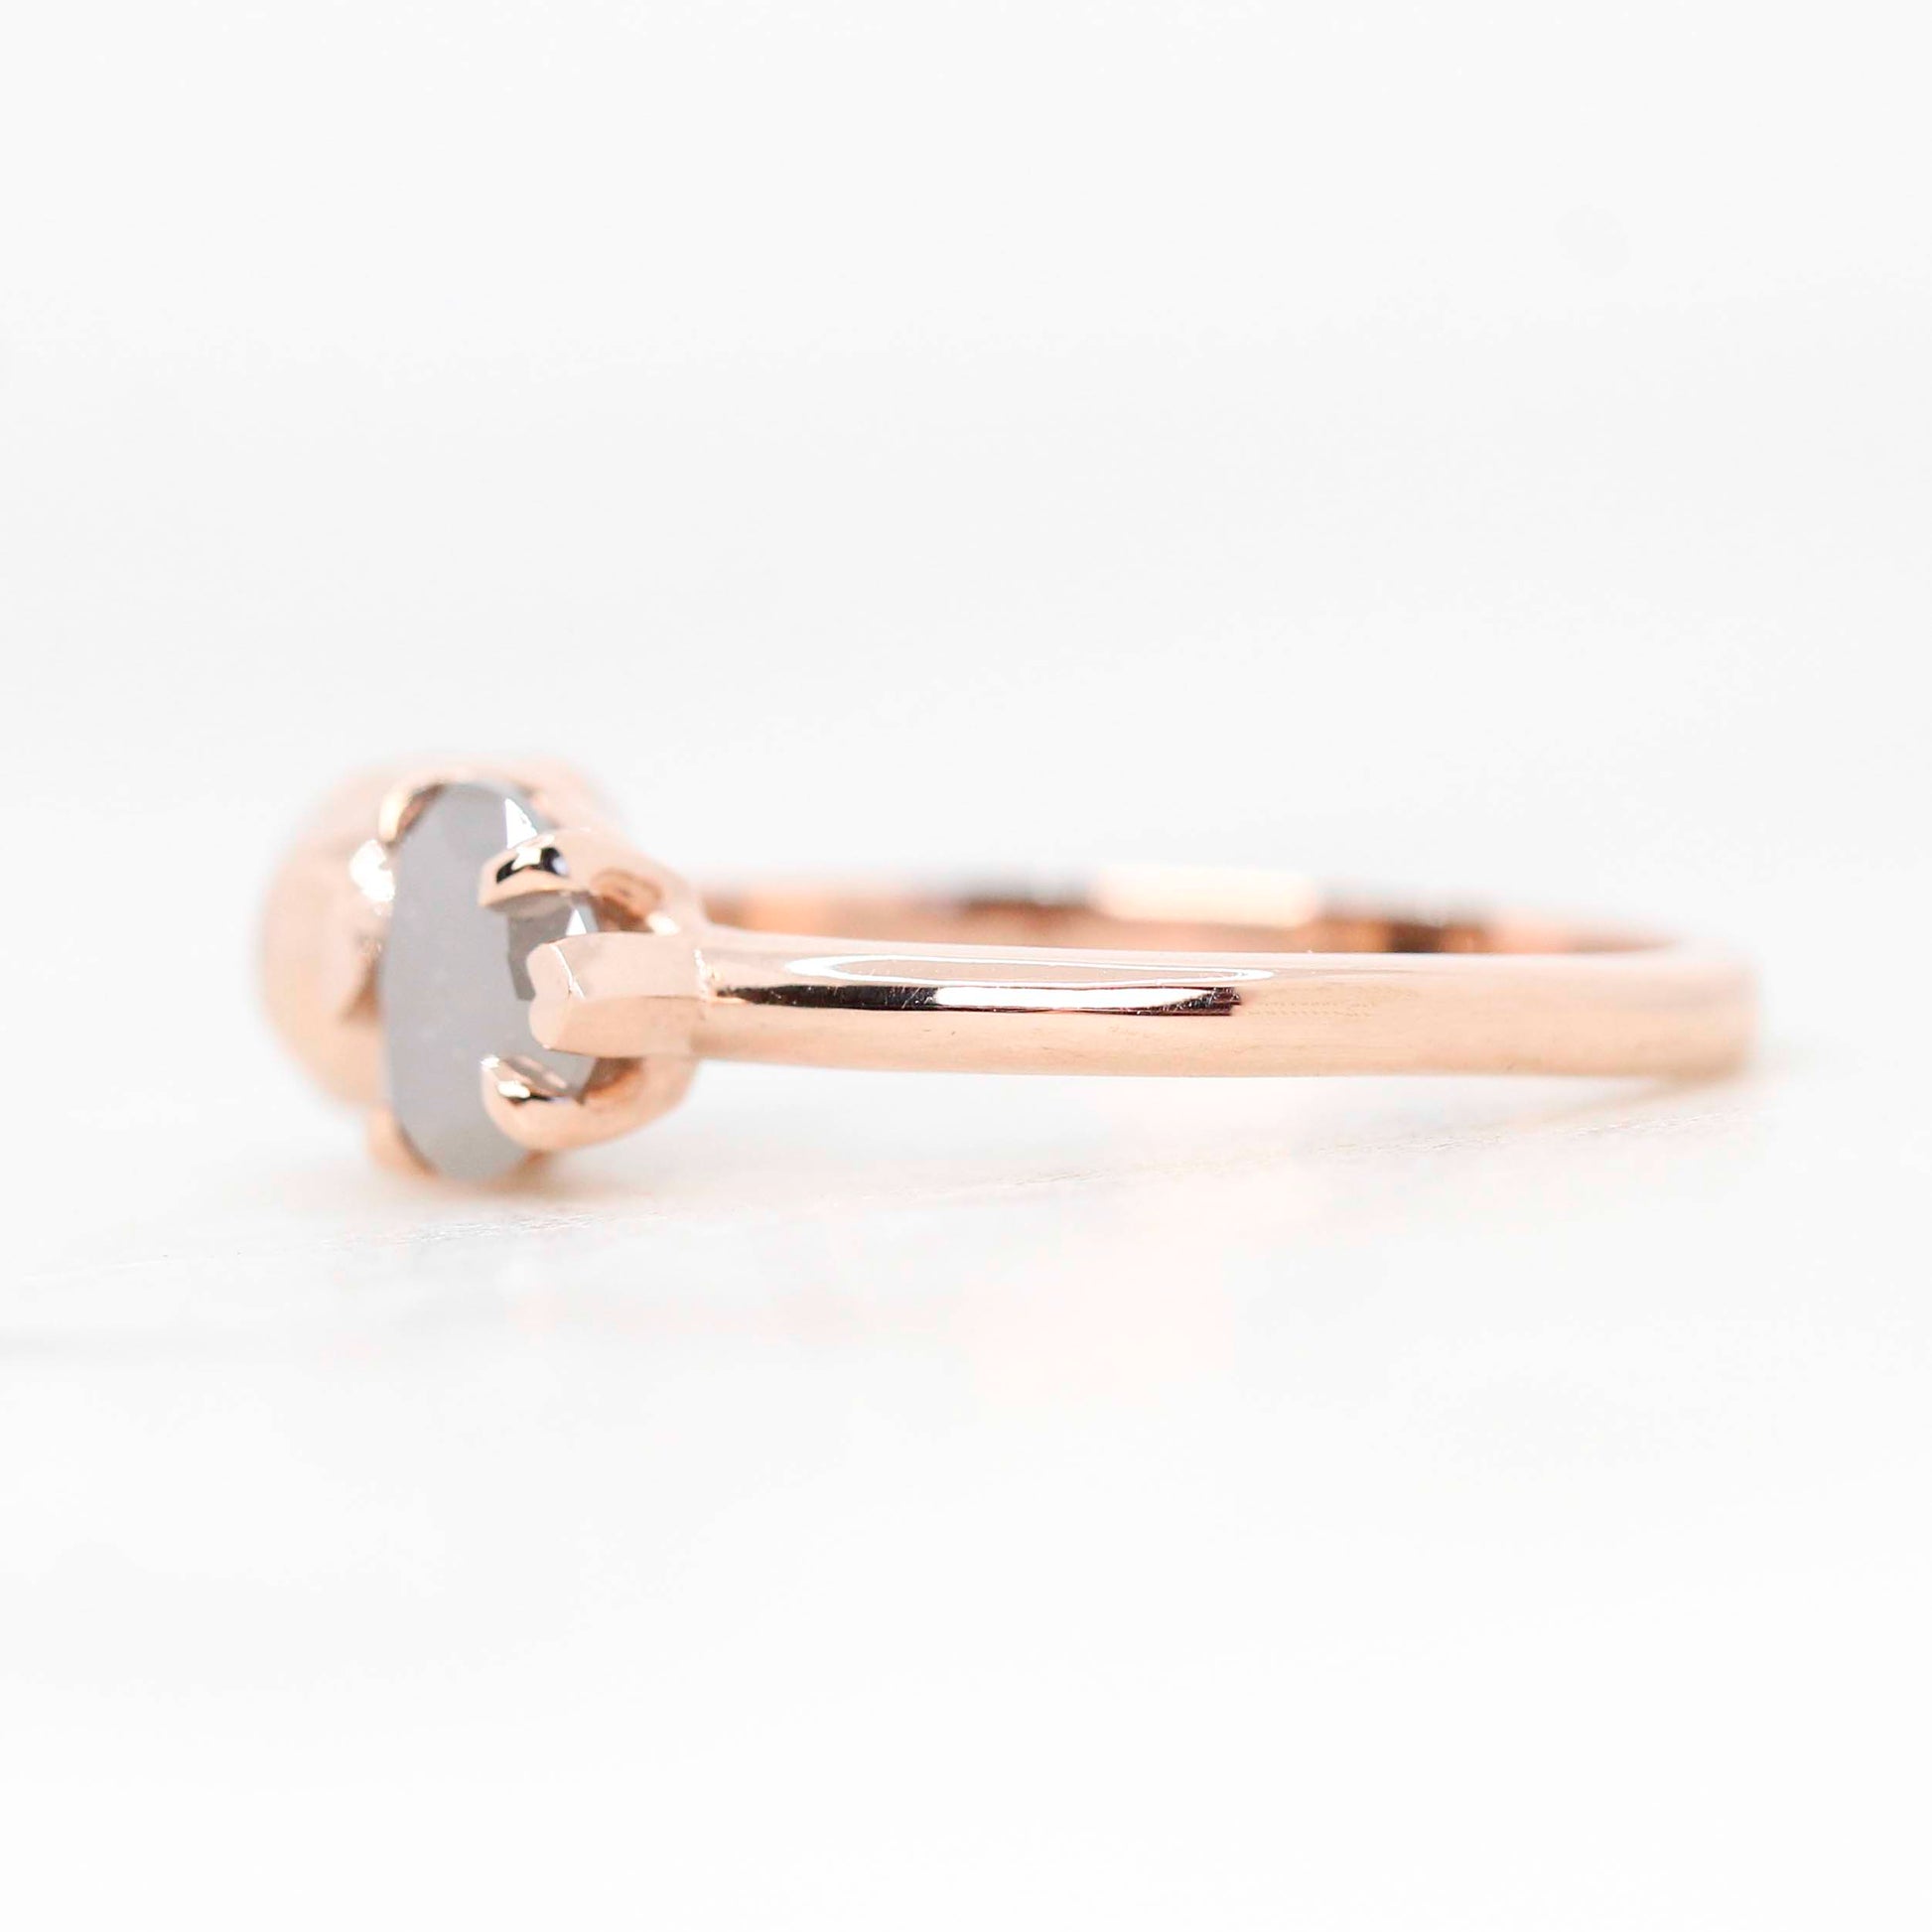 Skull Ring with a 0.83 Misty Gray Heart-Shaped Diamond and Hidden Diamond in 14k Rose Gold - Ready to Size and Ship - Midwinter Co. Alternative Bridal Rings and Modern Fine Jewelry